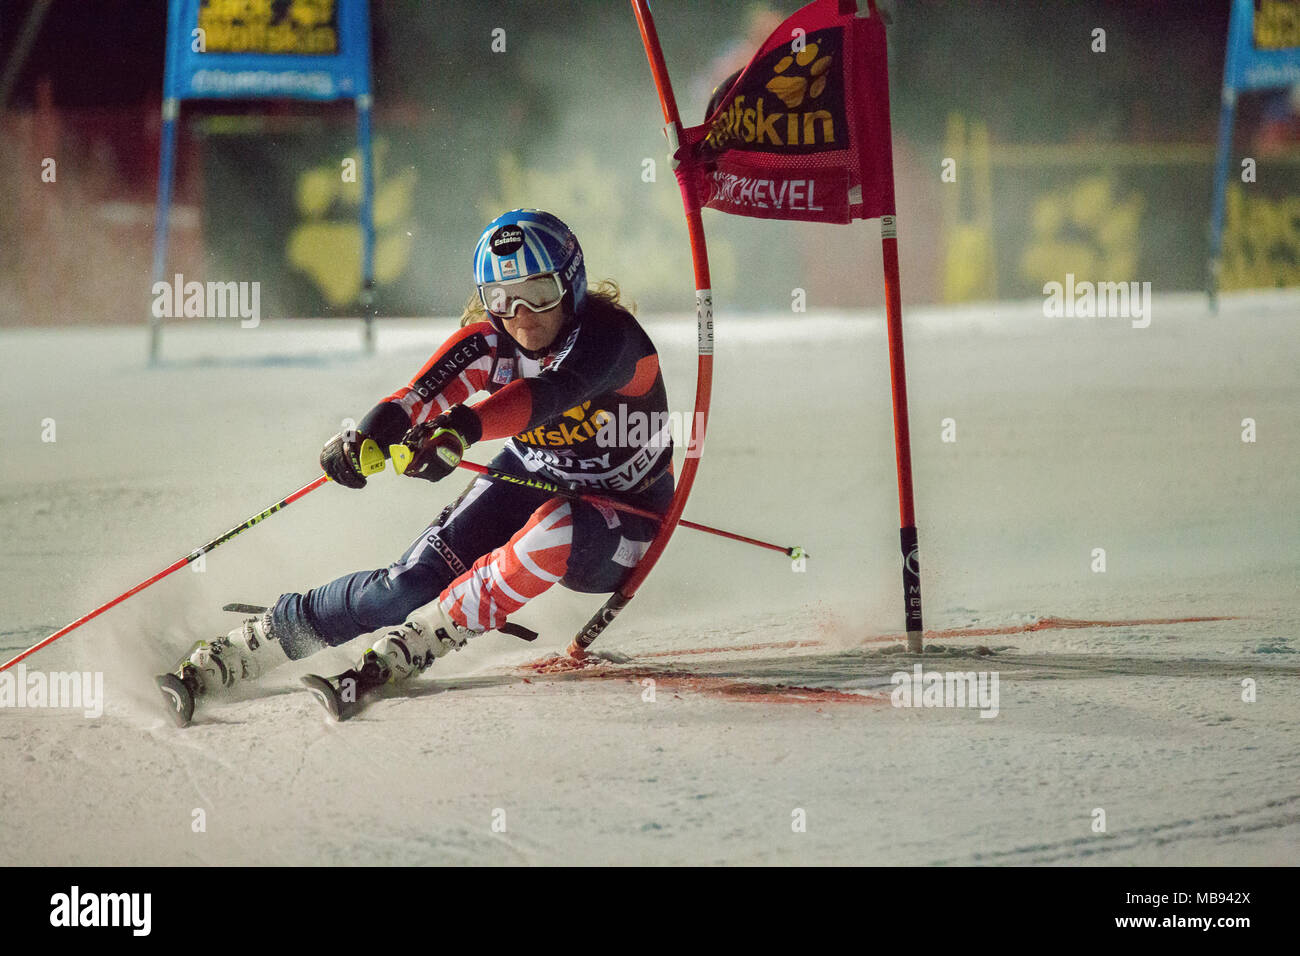 20 December 2017 Alex Tilley of Scotland Great Britain Competing in the Parallel Slalom of Courchevel Ladies Ski World Cup 2017 Stock Photo